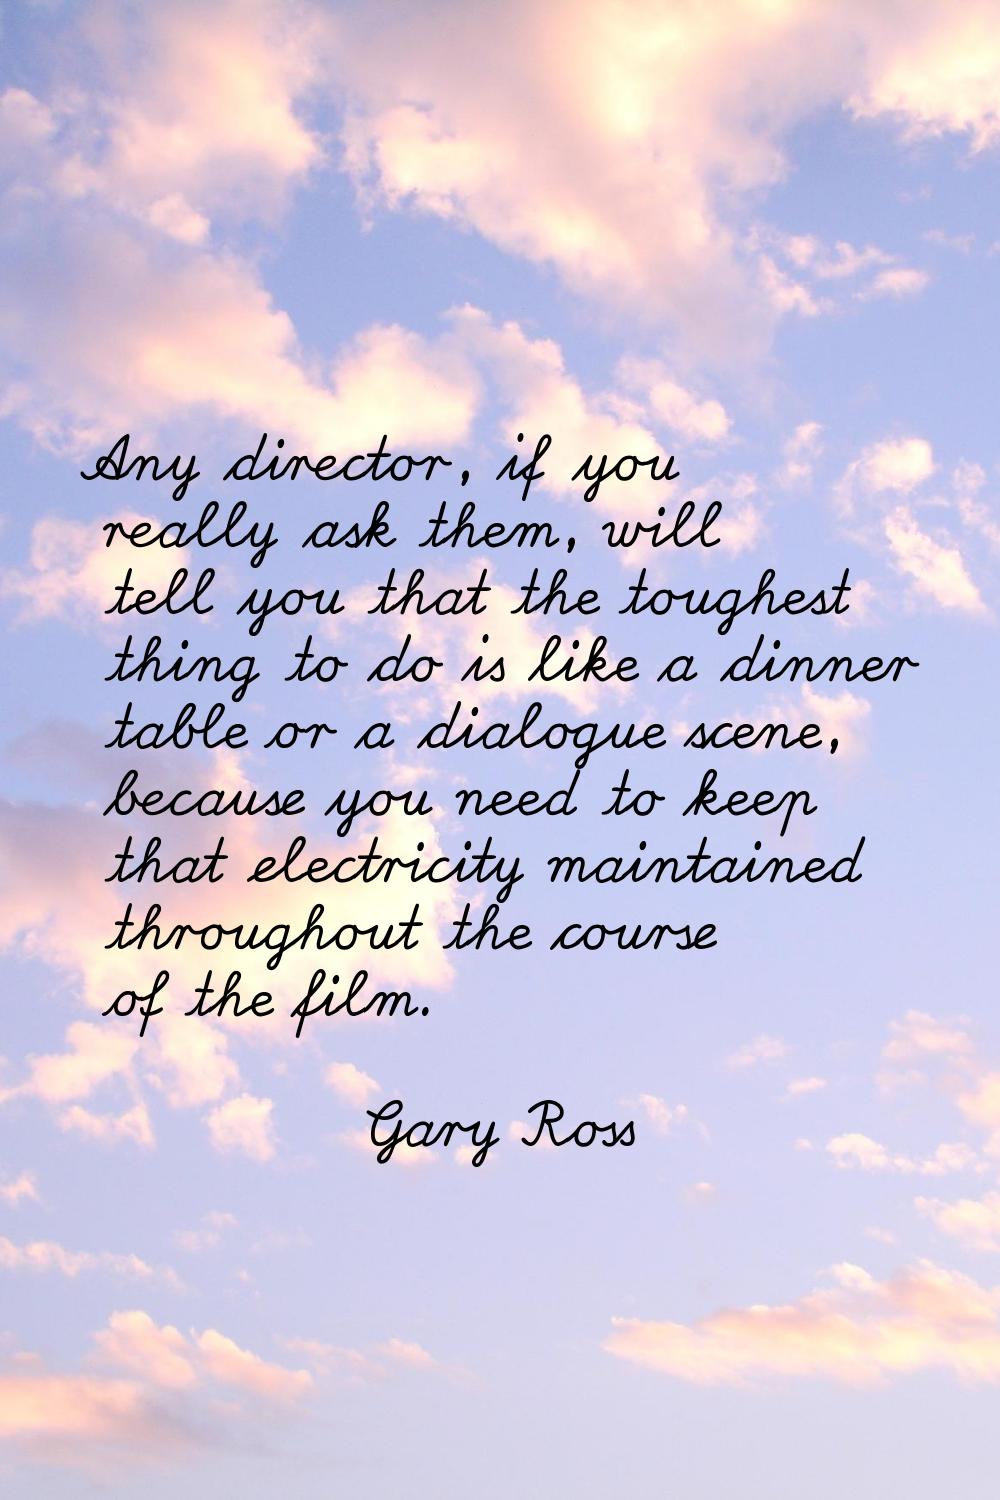 Any director, if you really ask them, will tell you that the toughest thing to do is like a dinner 